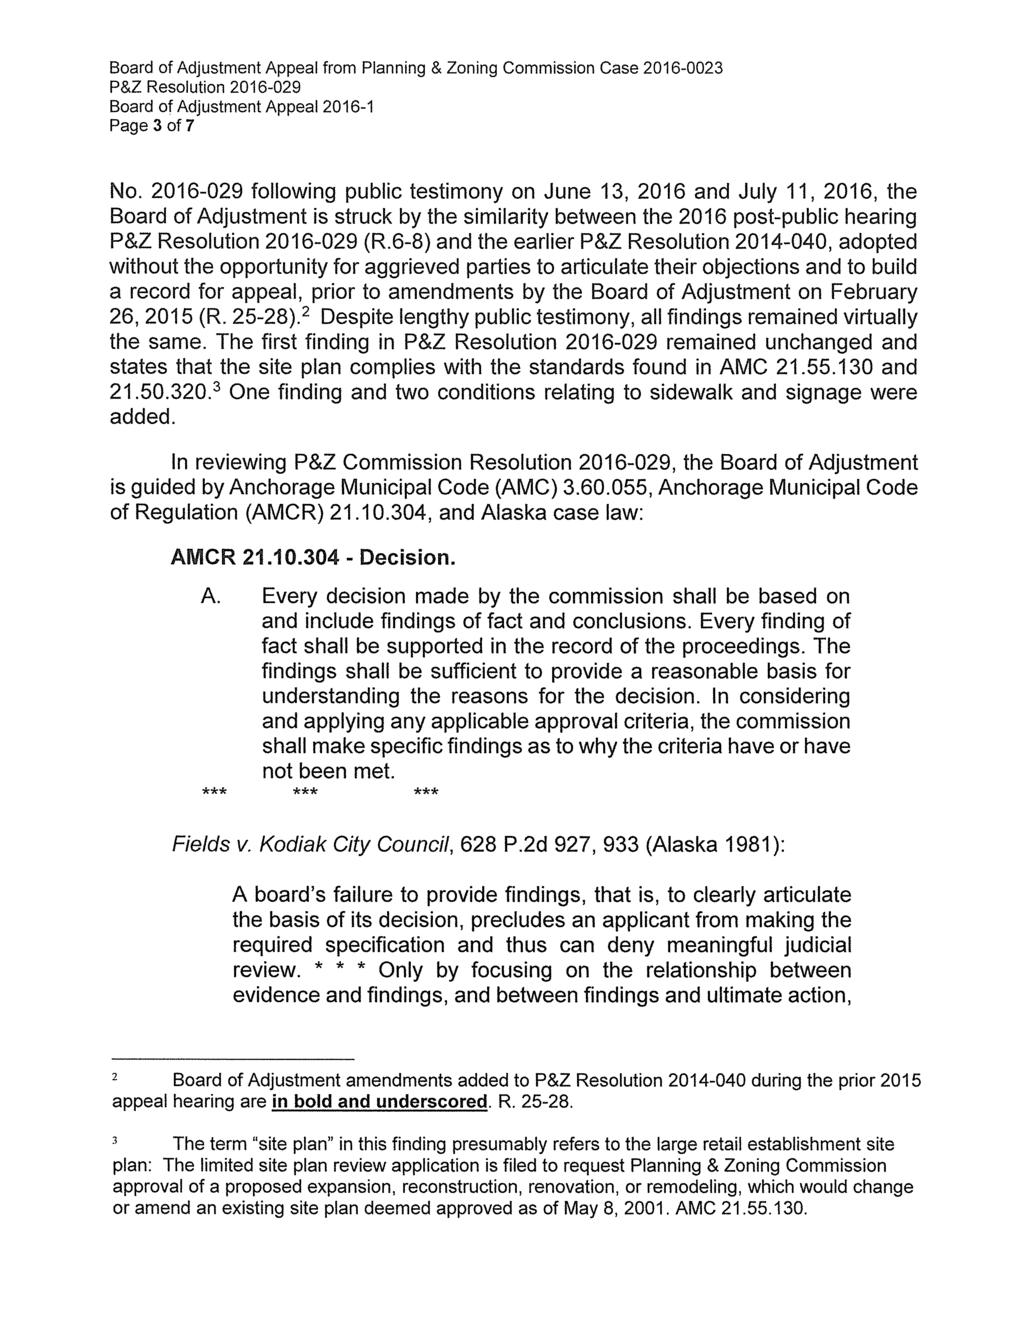 Page 3 of 7 No. 2016-029 following public testimony on June 13, 2016 and July 11, 2016, the Board of Adjustment is struck by the similarity between the 2016 post-public hearing (R.